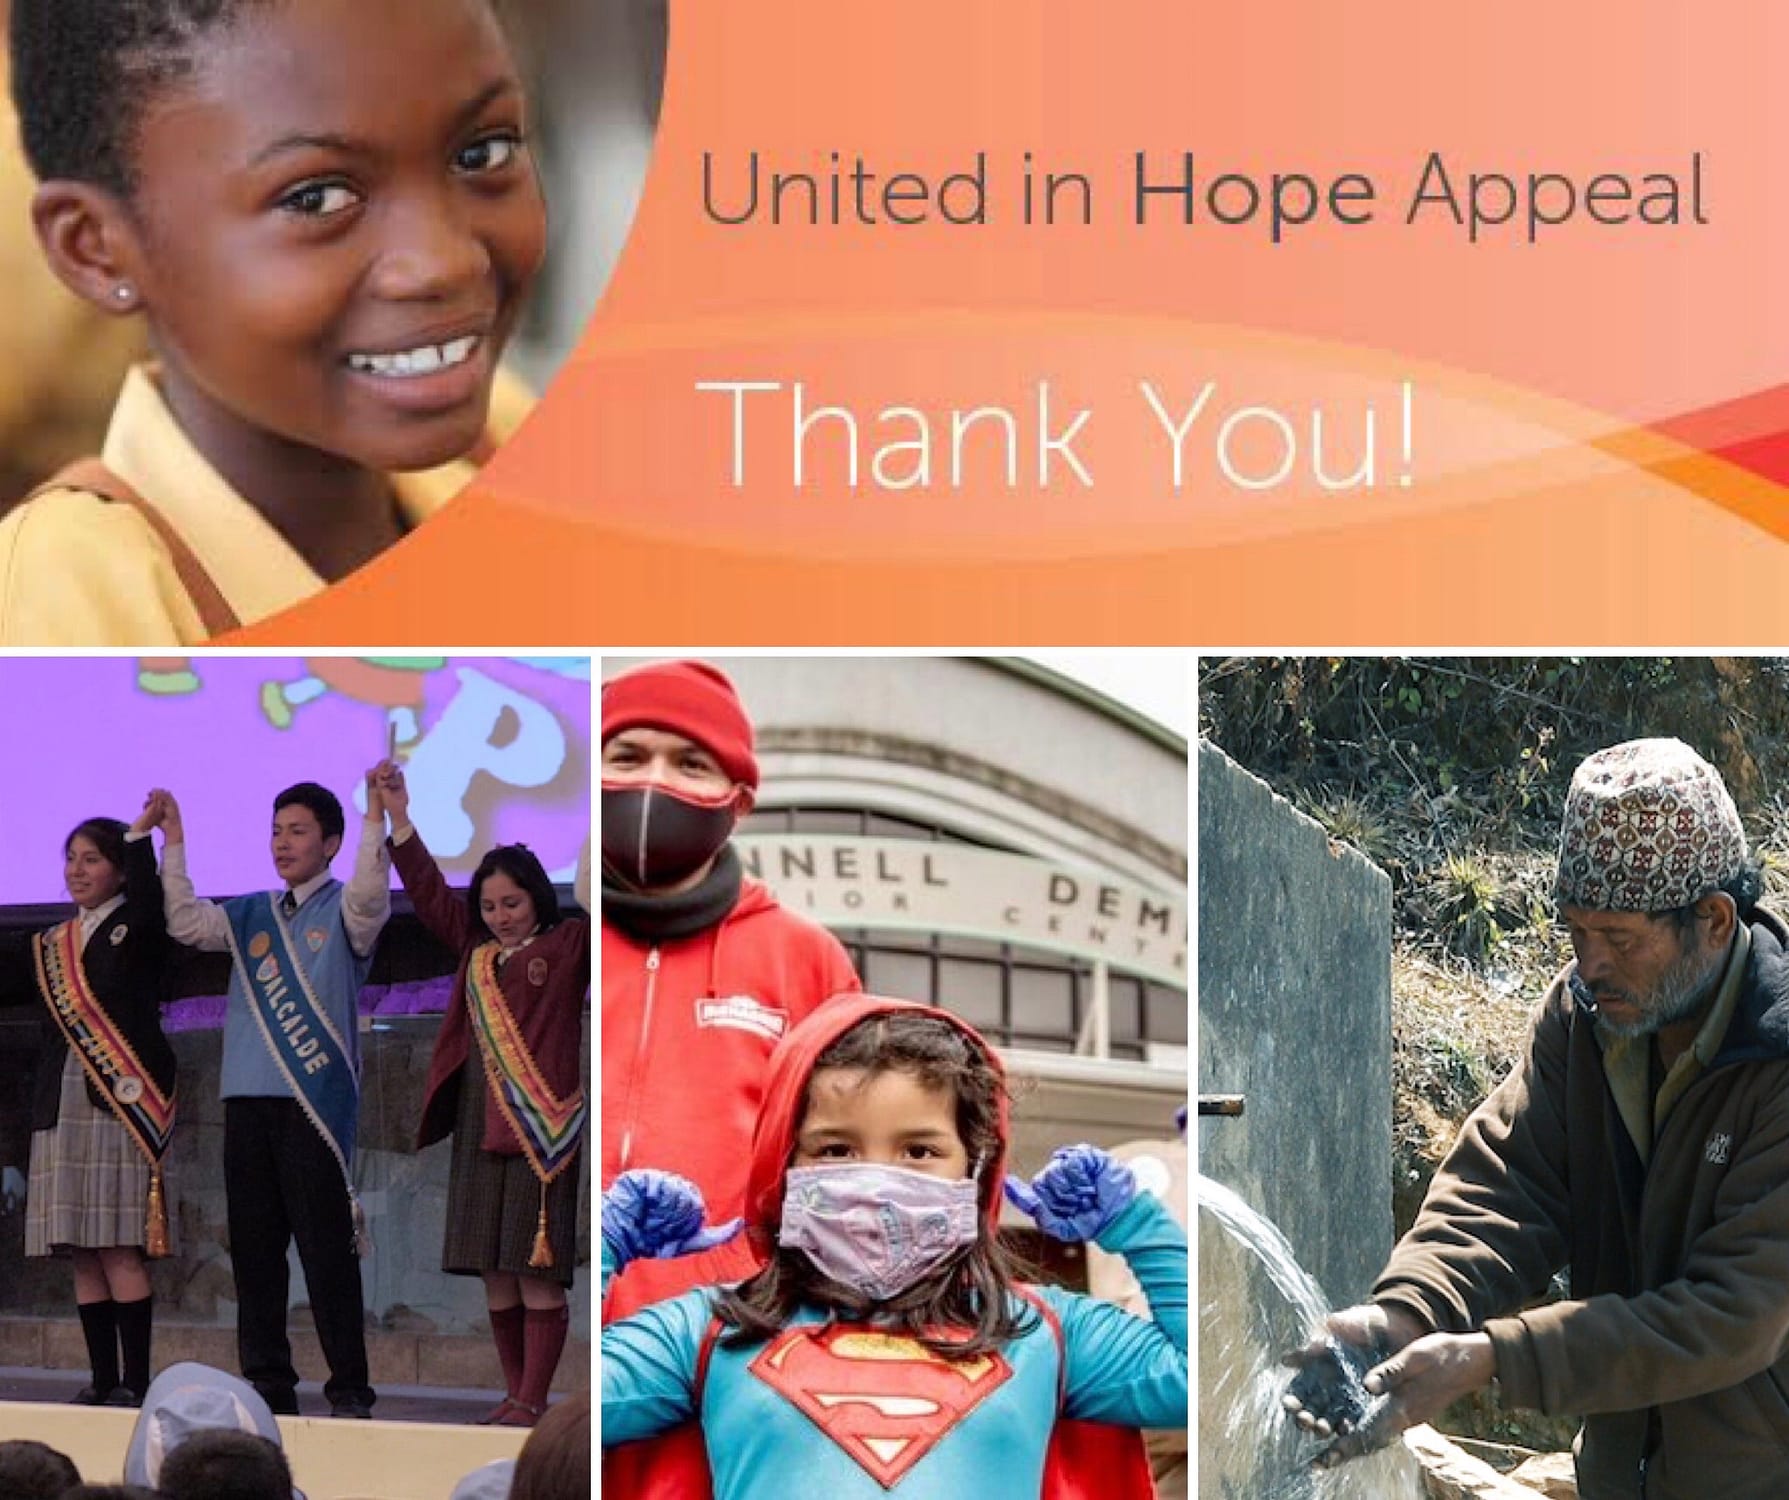 Thanks for supporting the United in Hope appeal.